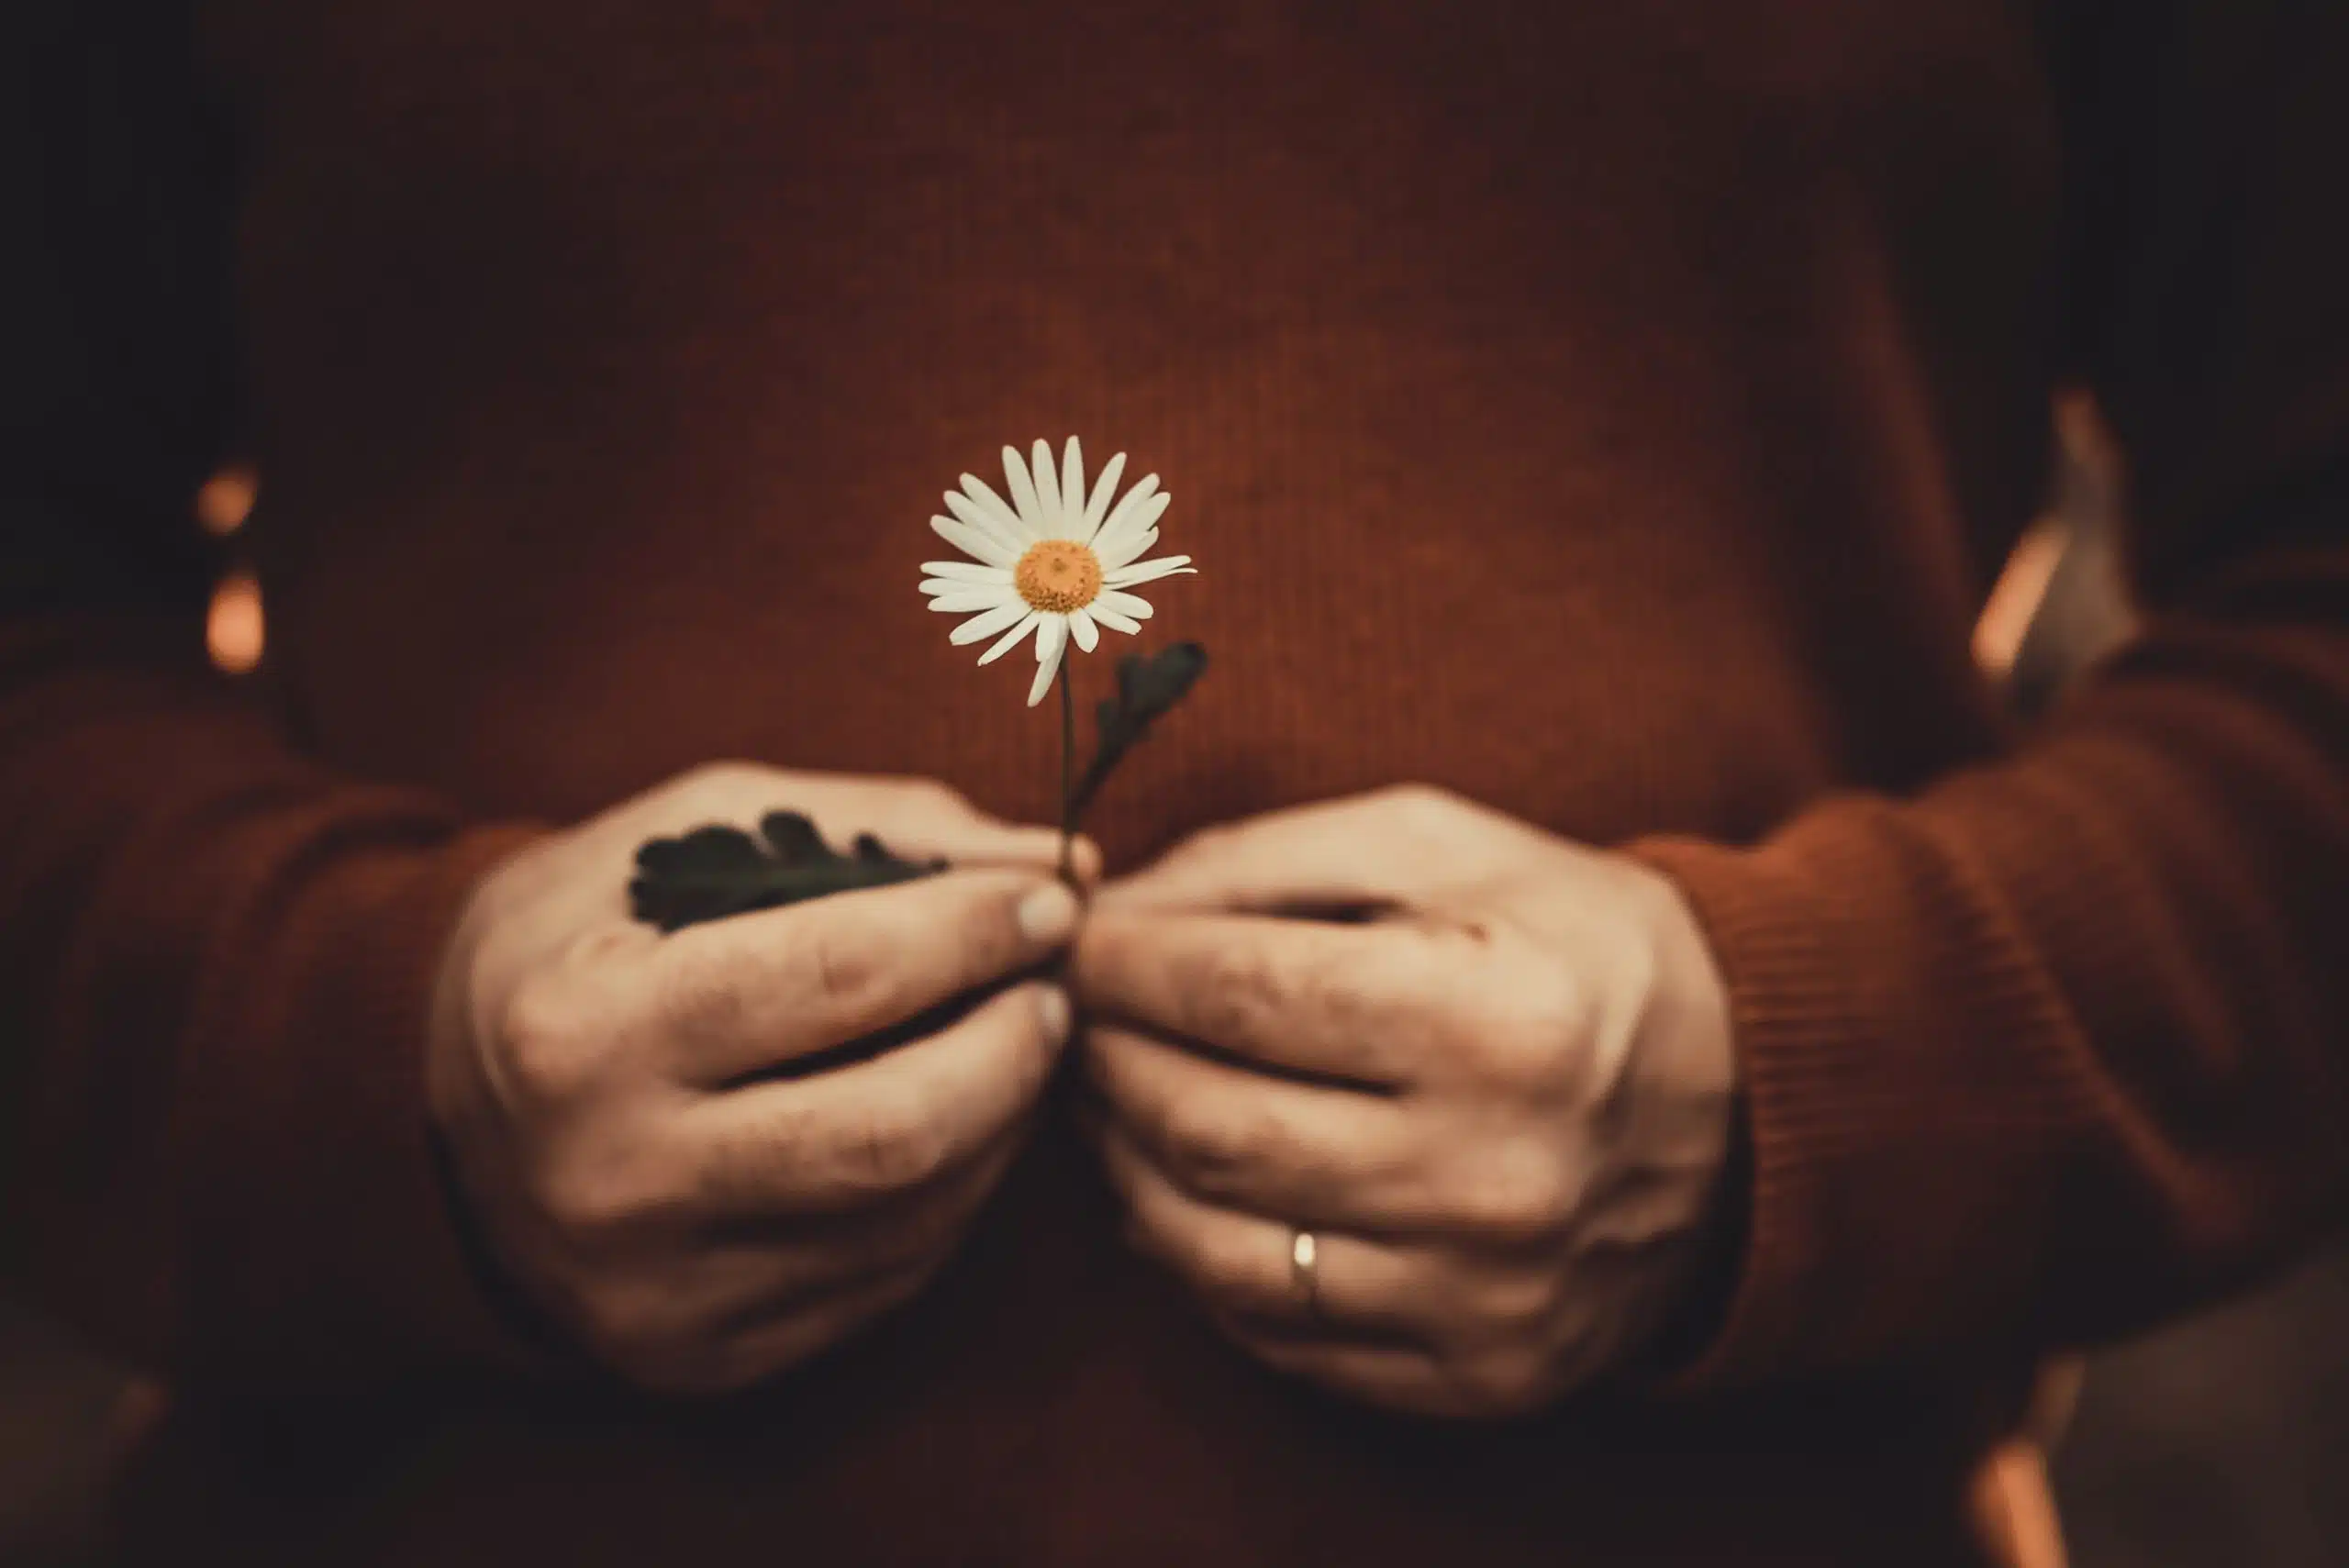 Male hands holding a beautiful daisy